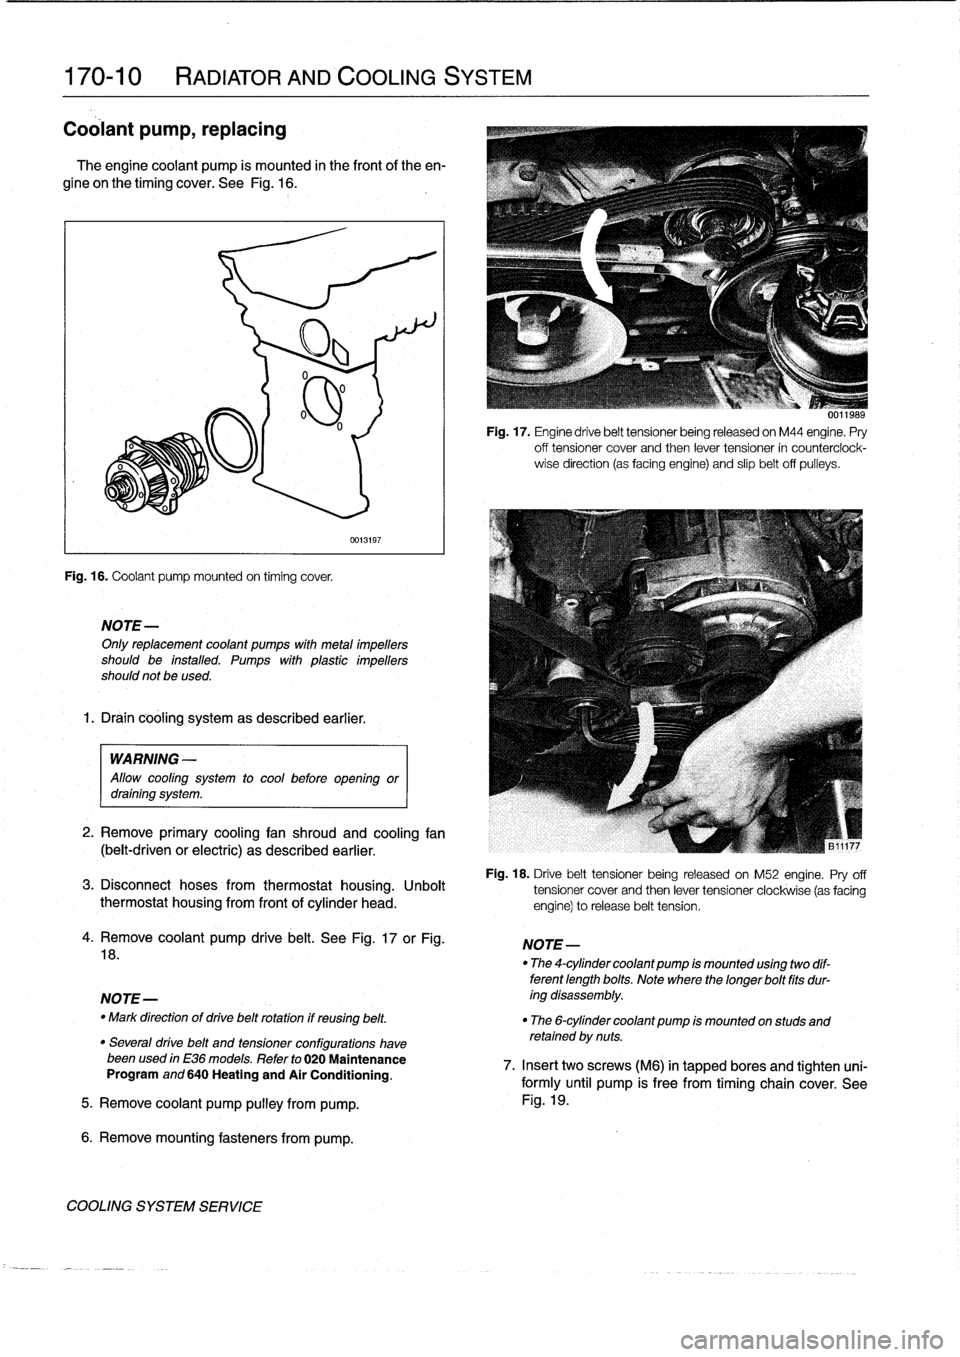 BMW 318i 1996 E36 Workshop Manual 
170-10

	

RADIATOR
AND
COOLING
SYSTEM

Coolant
pump,
replacing

The
engine
coolant
pump
is
mounted
in
the
frontof
the
en-

gine
on
the
timing
cover
.
See
Fig
.
16
.

Fig
.
16
.
Coolant
pump
mounted
